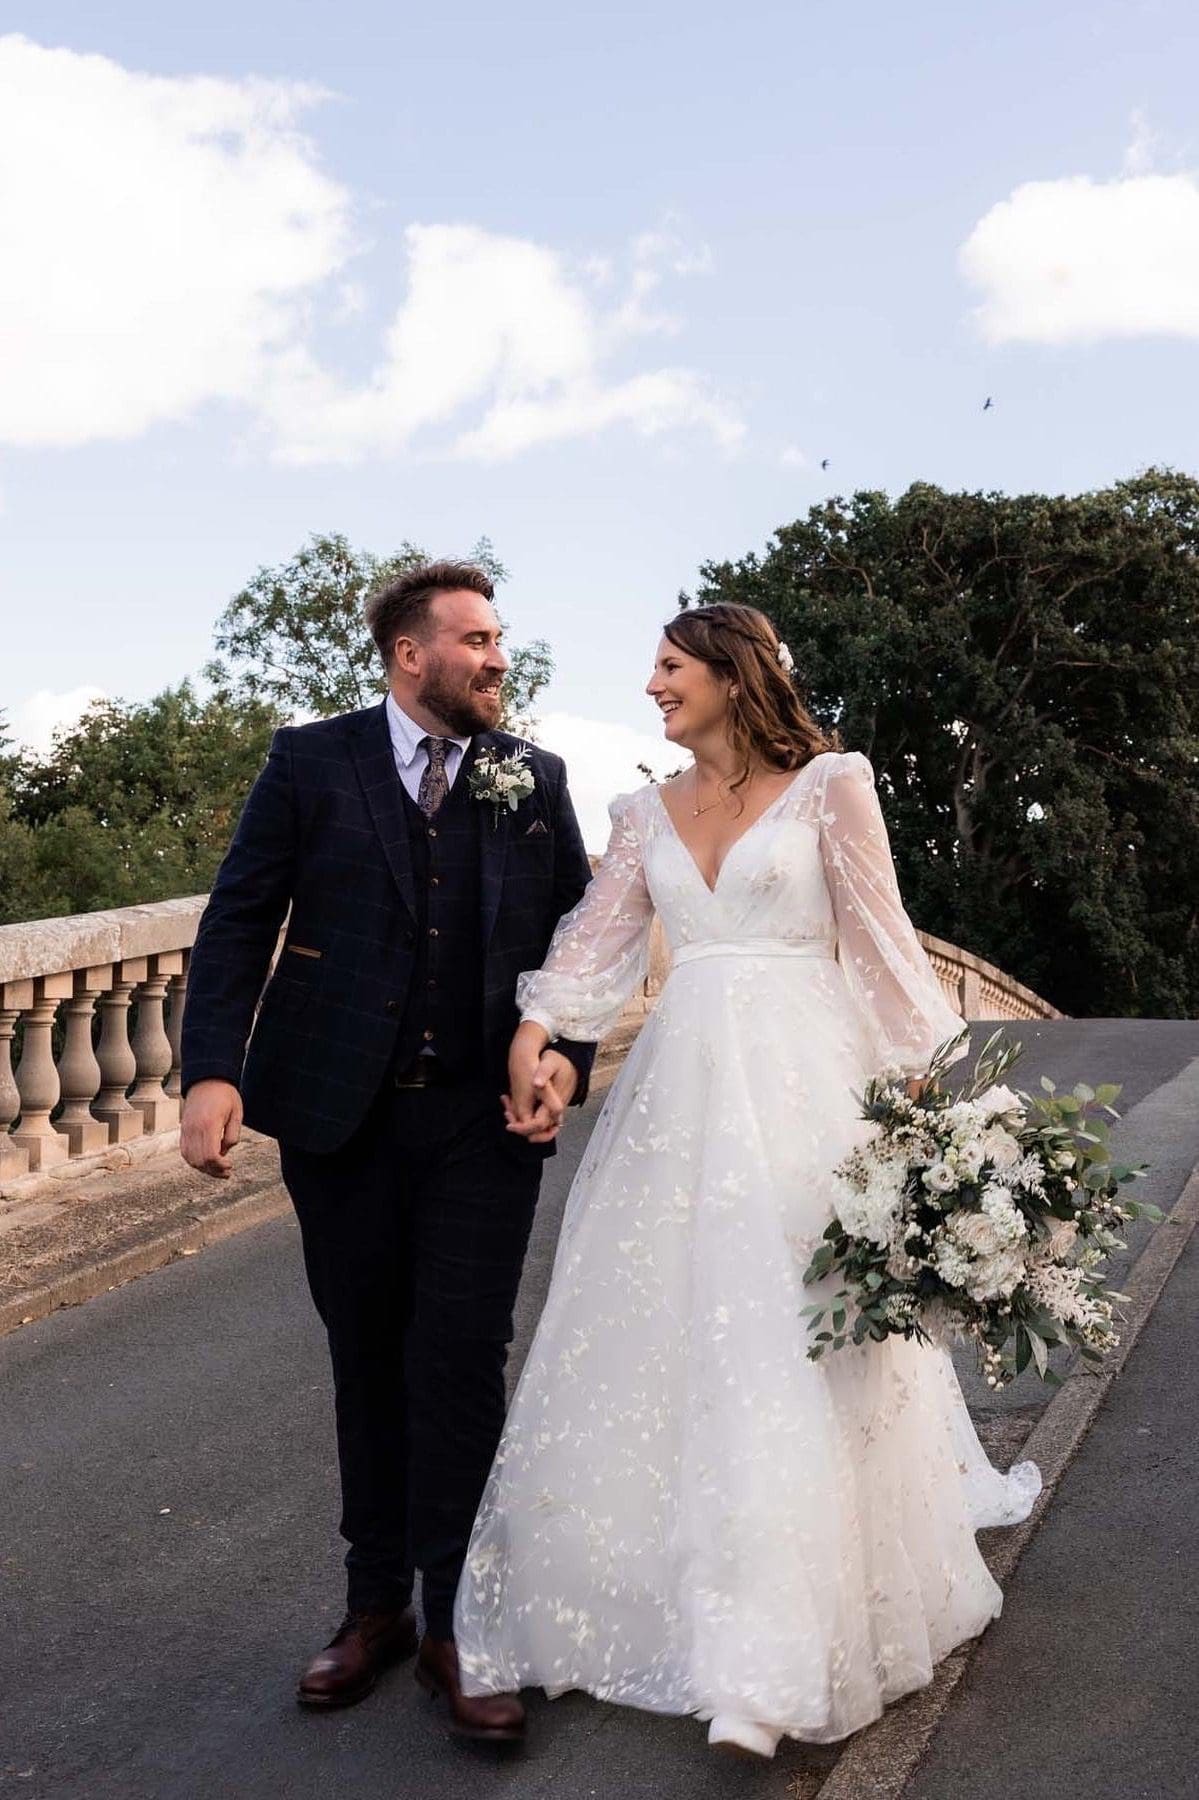 Sophie chose the Iris by Sassi Holford for her wedding dress